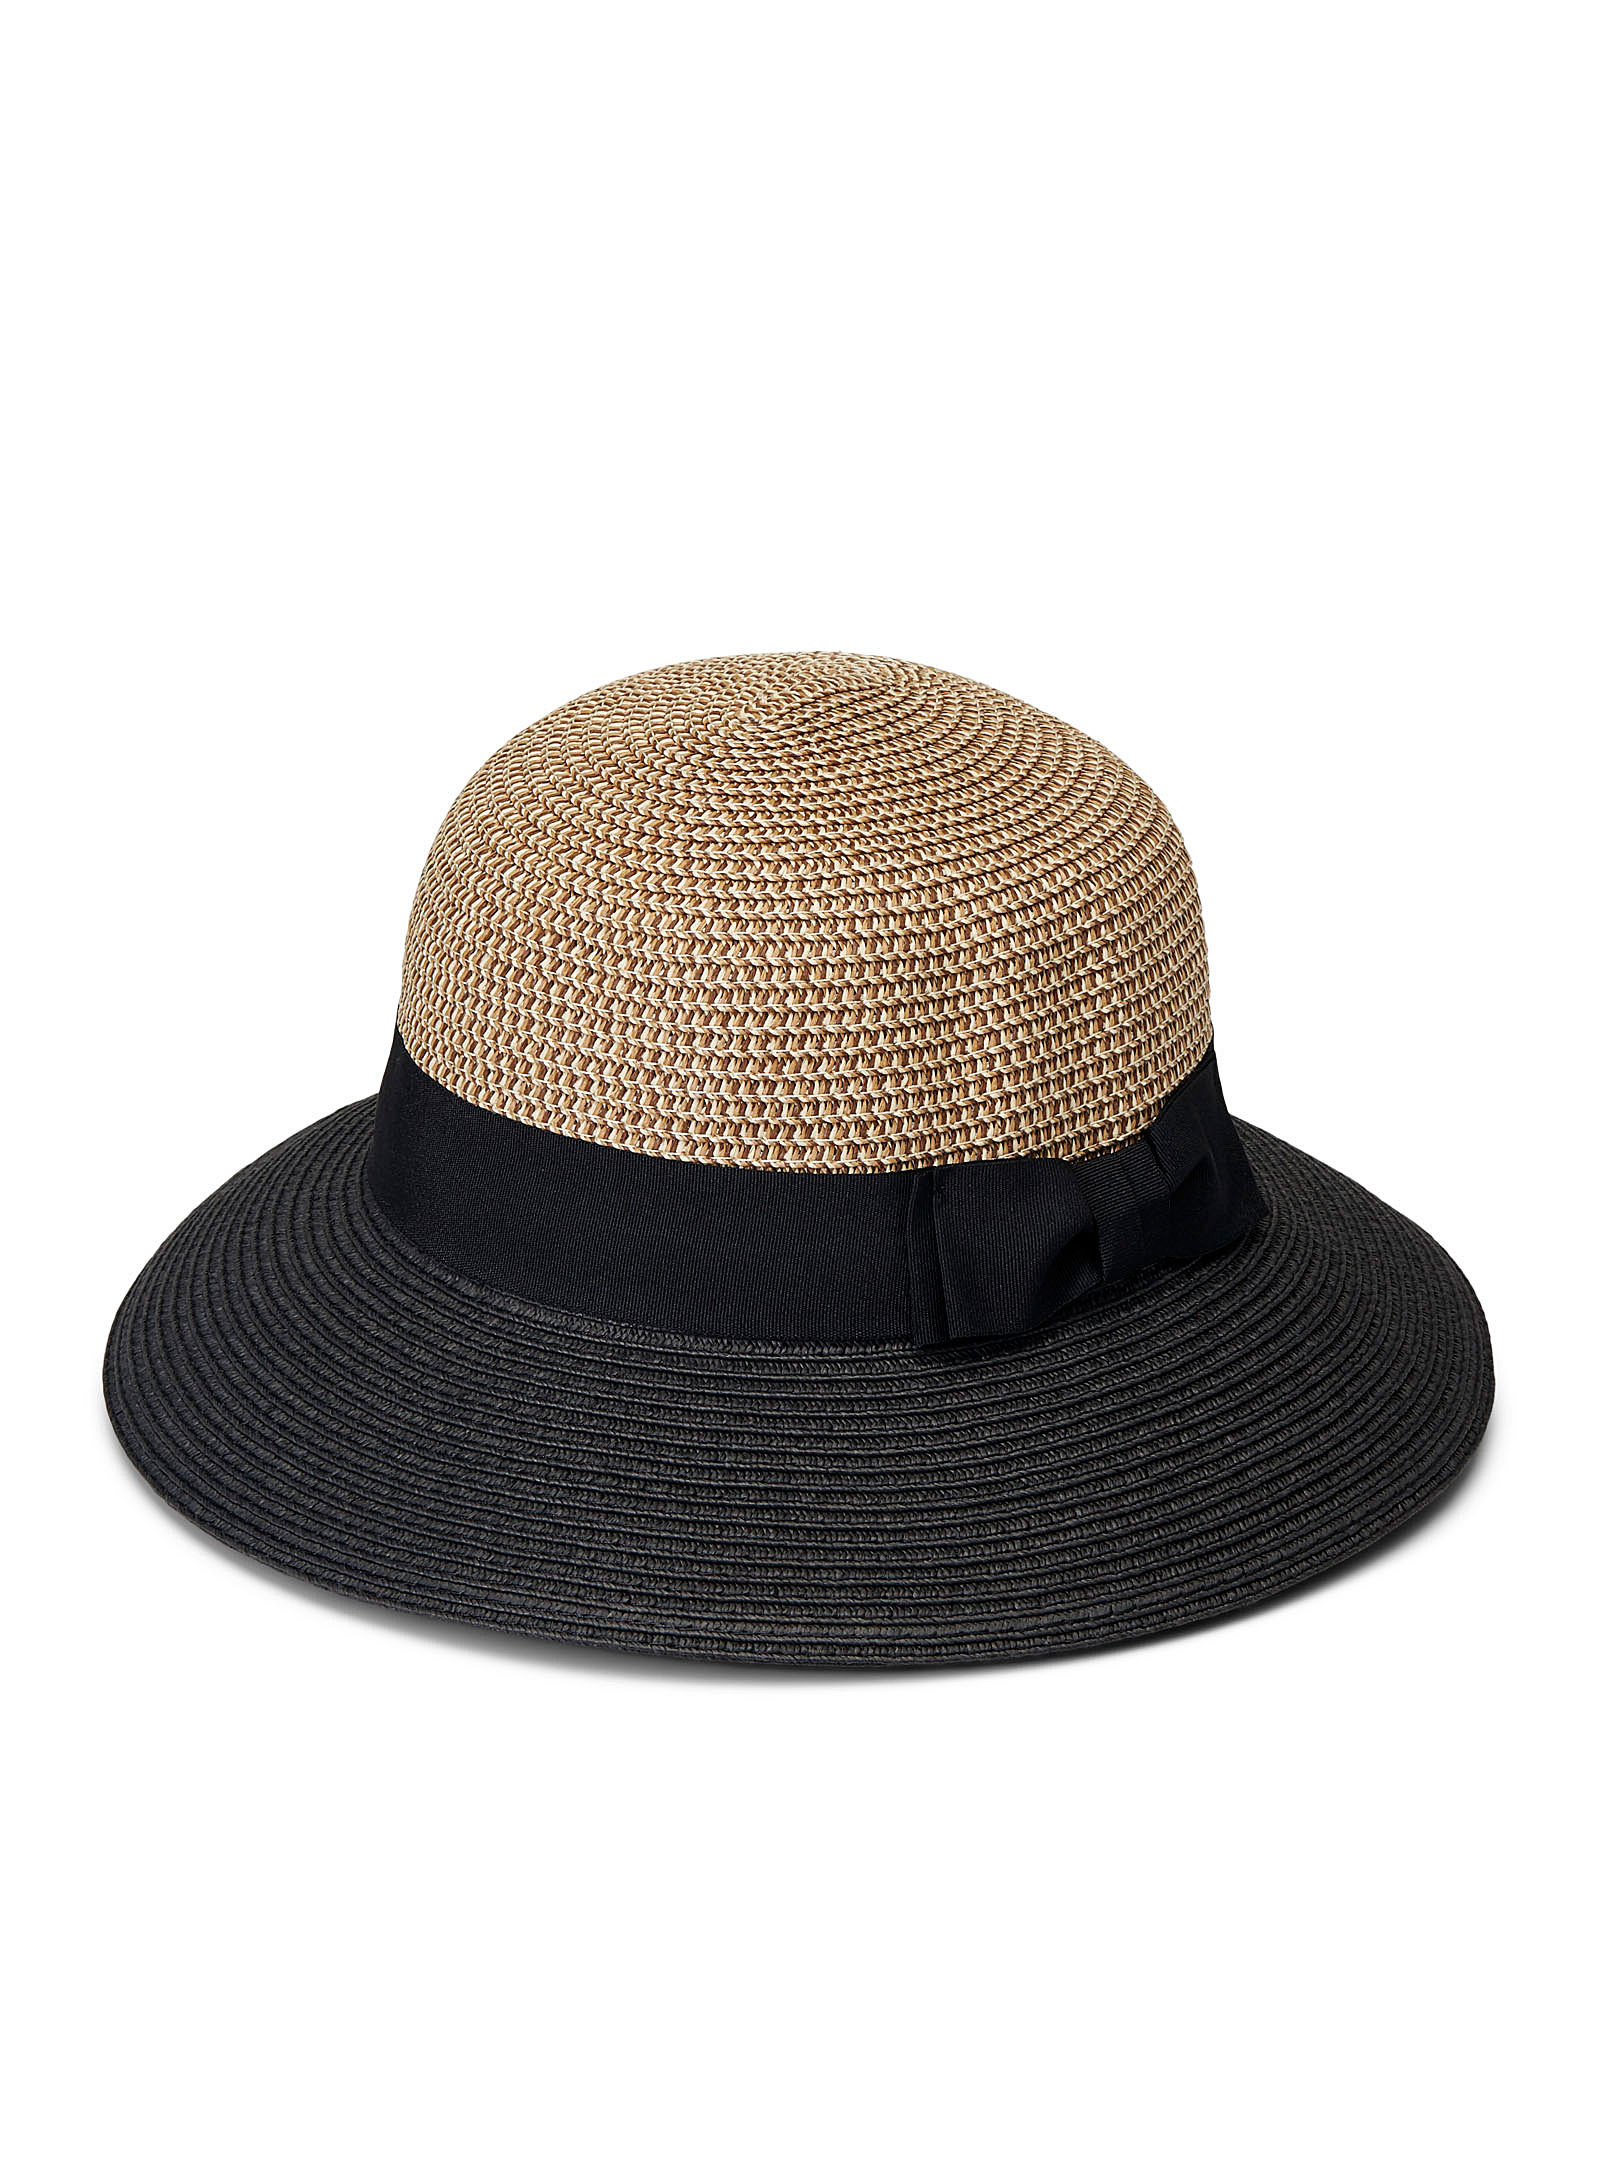 Parkhurst Two-tone Cloche Hat In Patterned Black